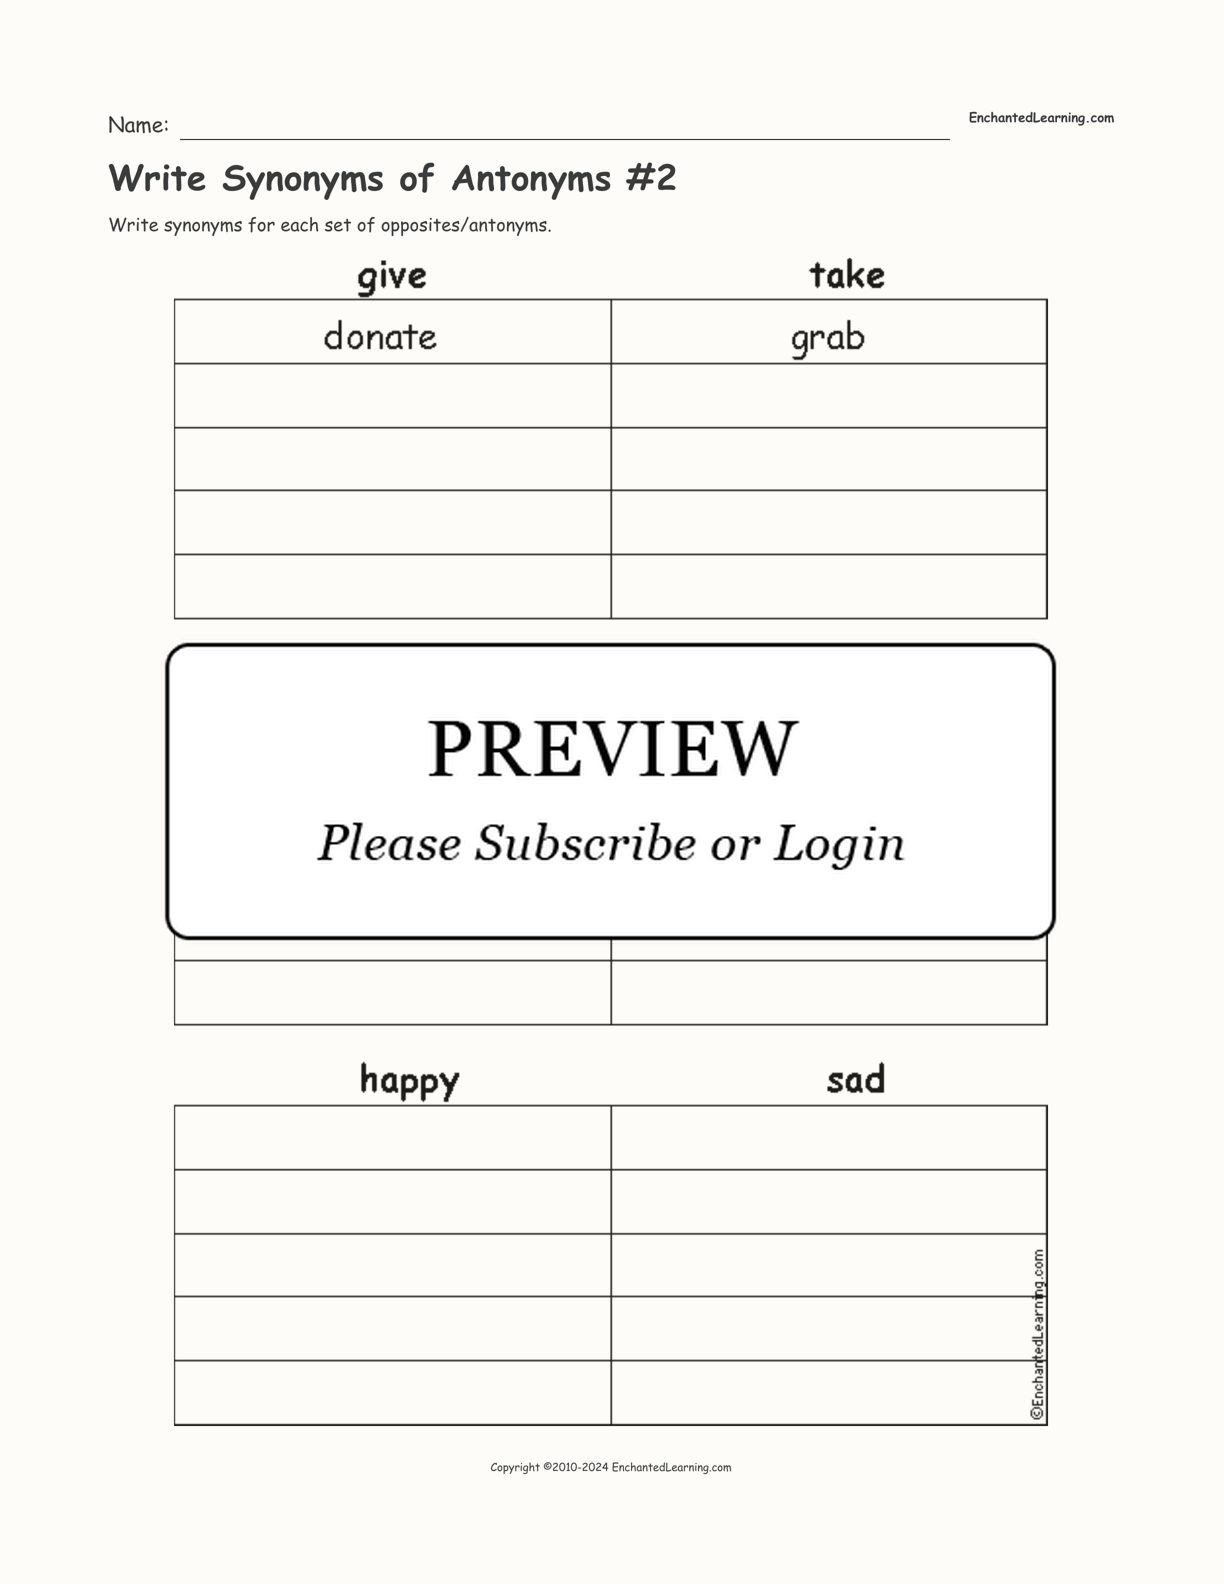 Write Synonyms of Antonyms #2 interactive worksheet page 1